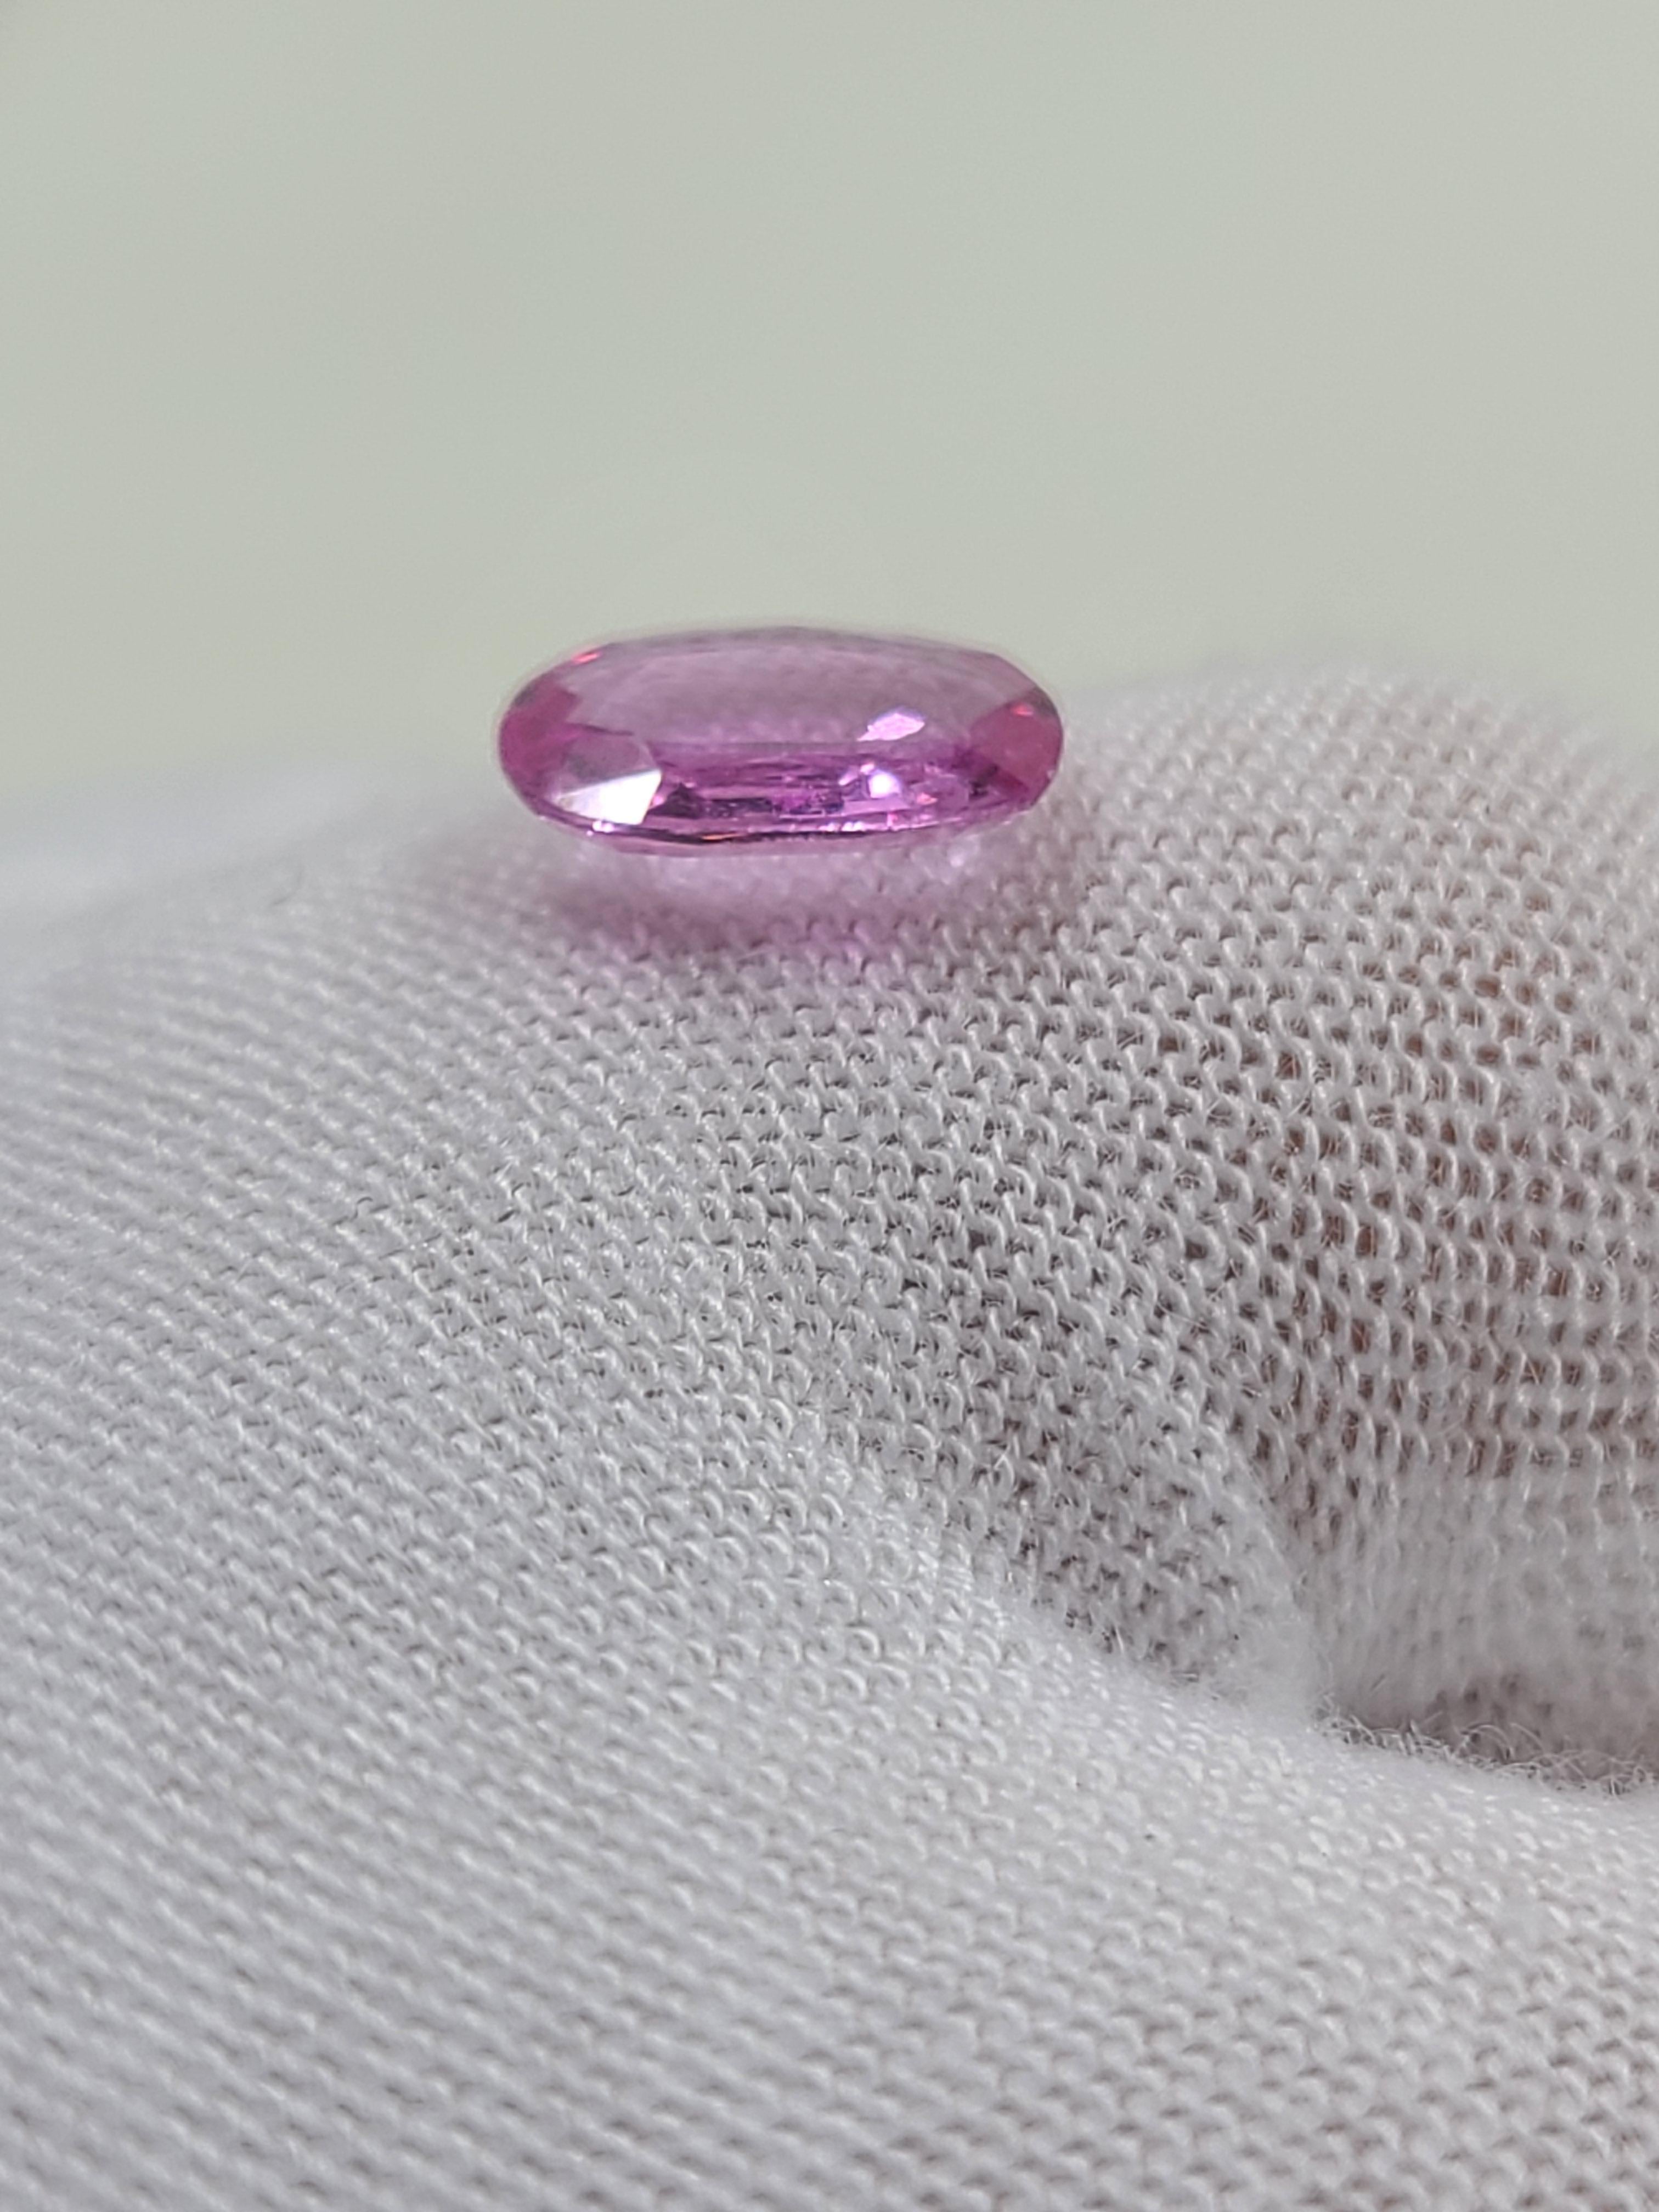 1.15 Carat Pink Sapphire 8x5mm Oval Faceted Cut - Single Loose Stone For Sale 1